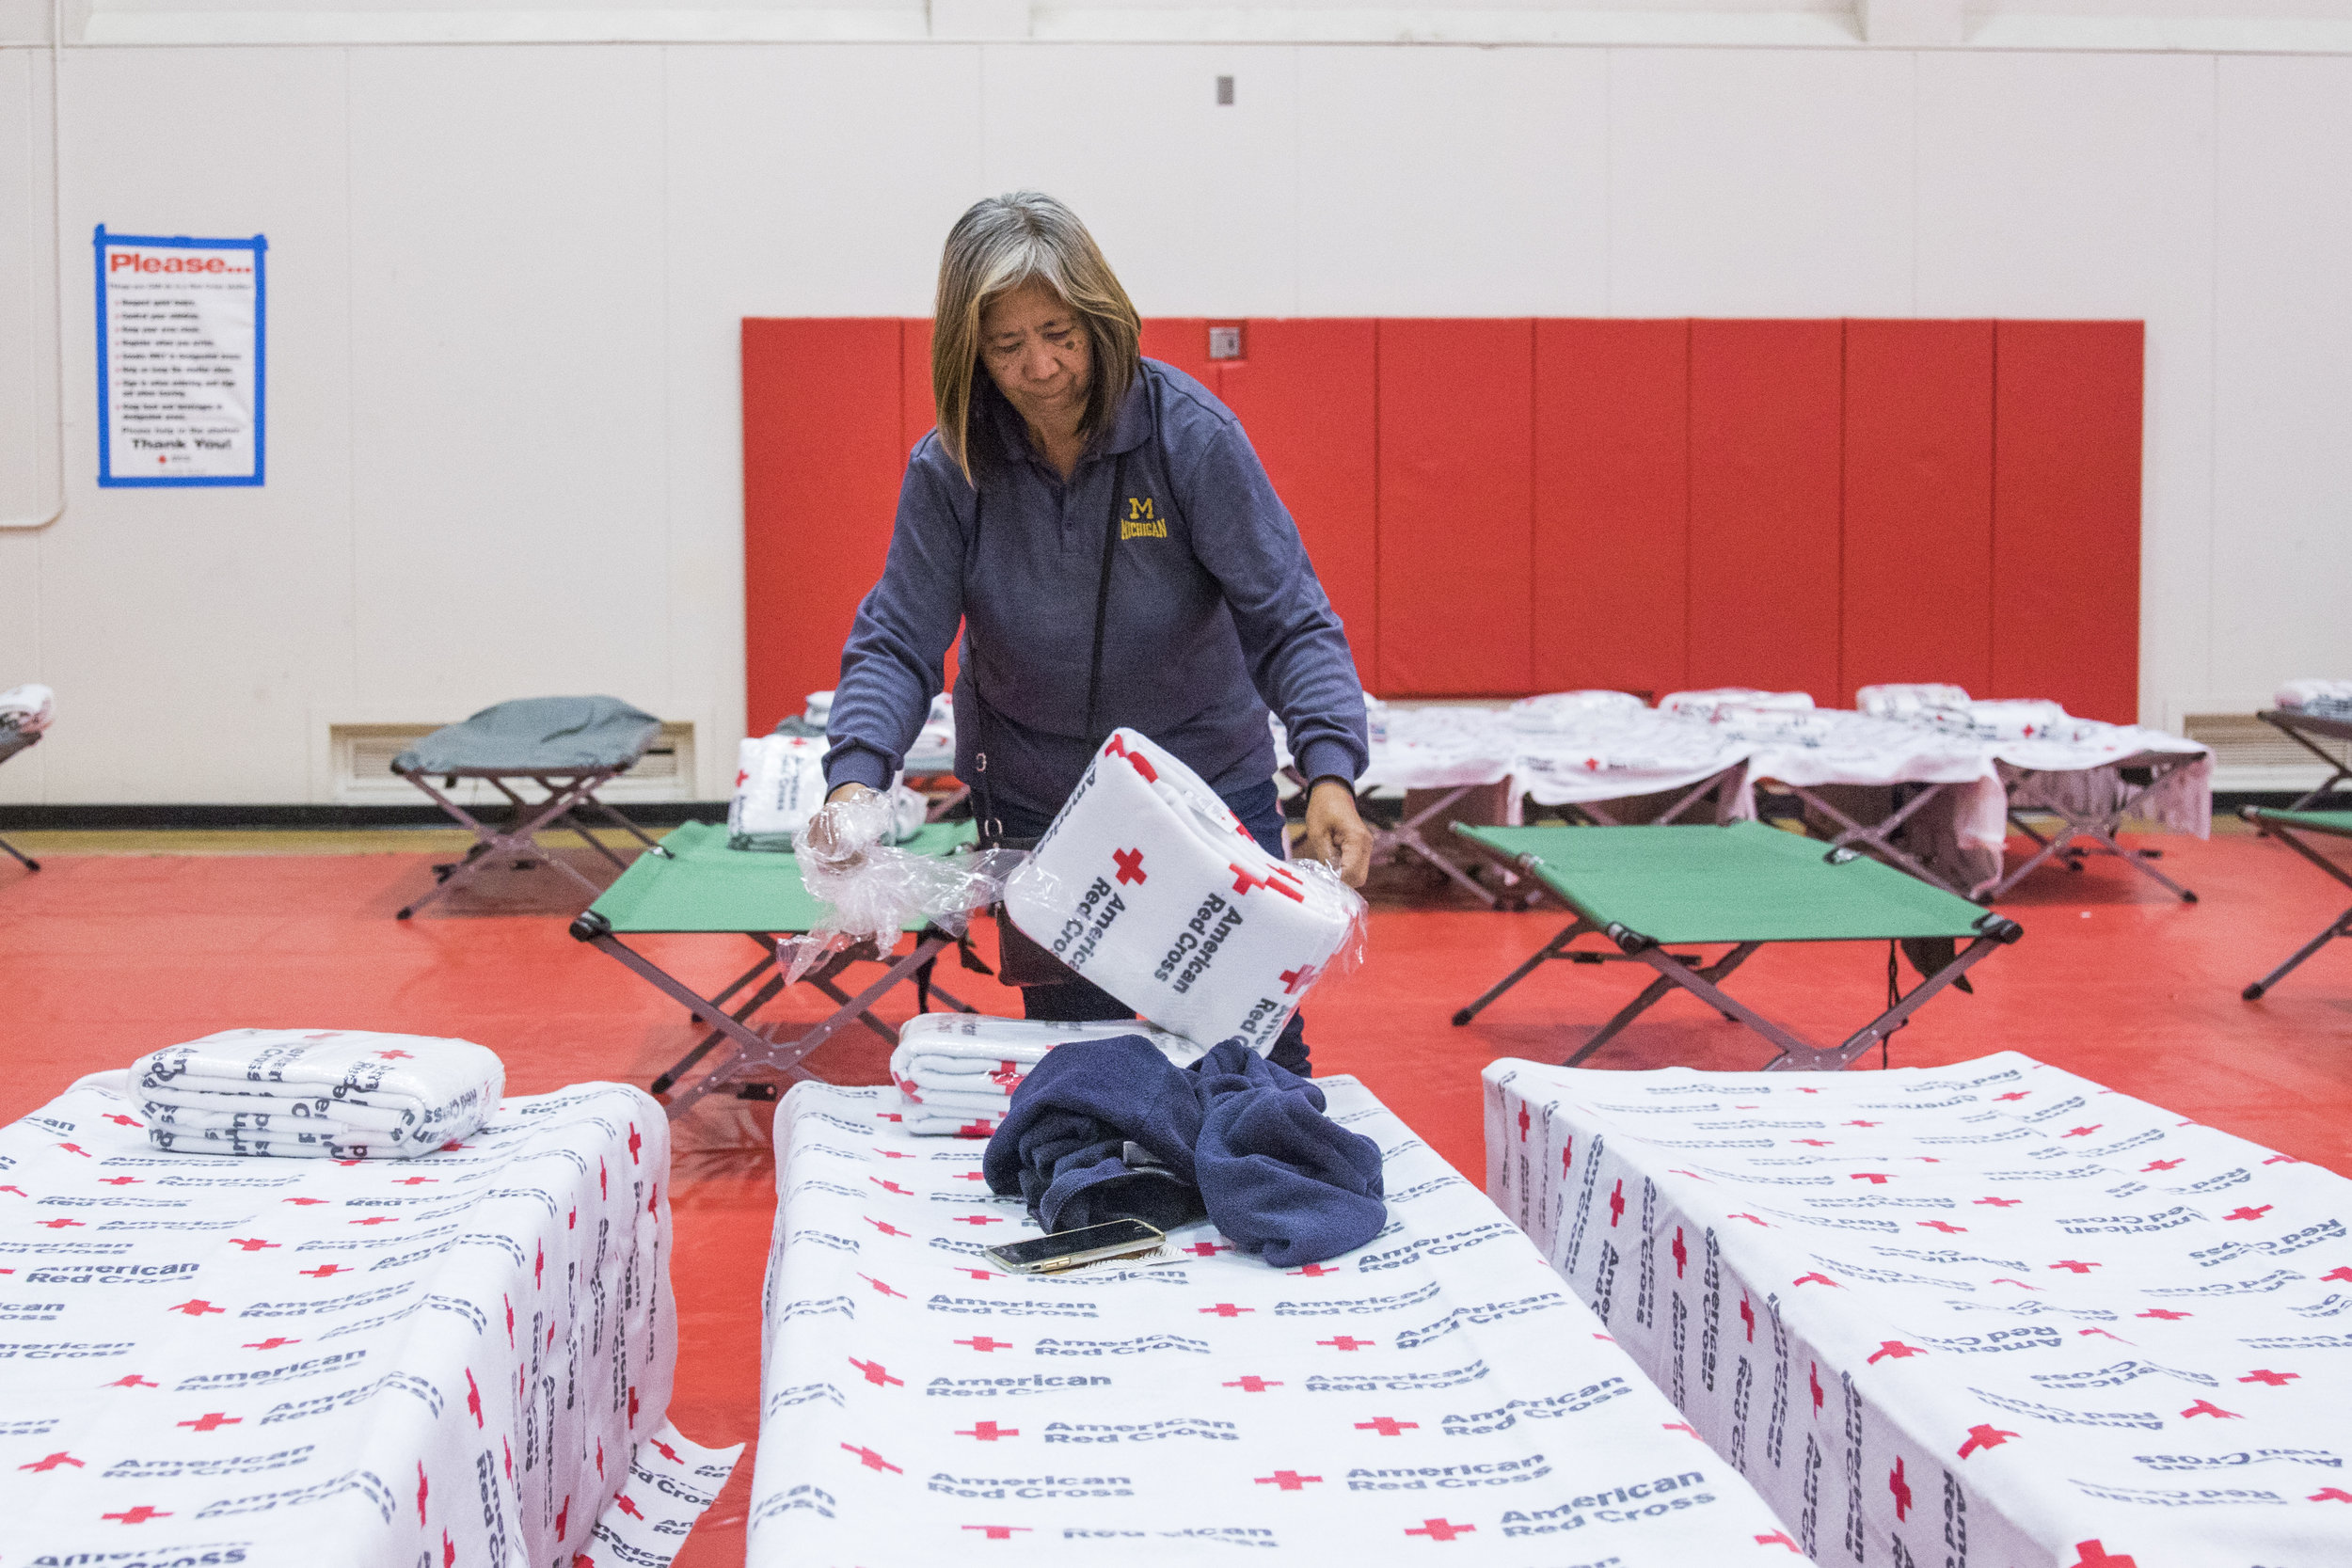  Irene Geske sets up cots for her family inside of Pierce Colleges North Gym in Woodland Hills, California on November 9, 2018. Irene and her family evacuated their home in Oak Park, California two nights ago, but spent last night at a hotel in Van N